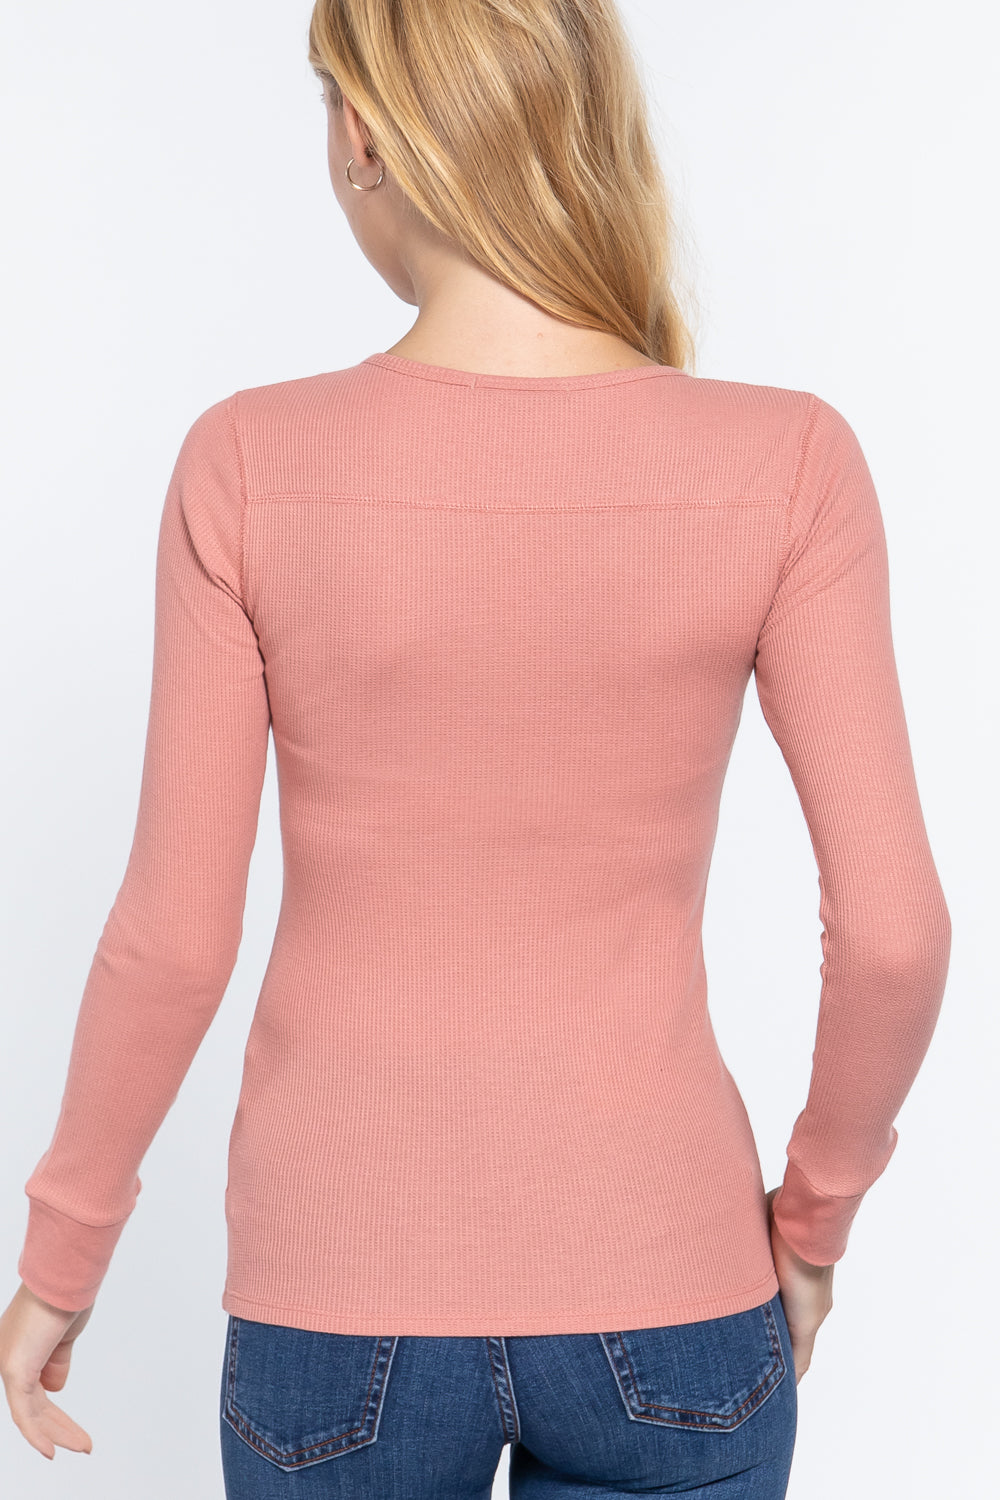 Long Sleeve V-neck Placket Women's Thermal Top